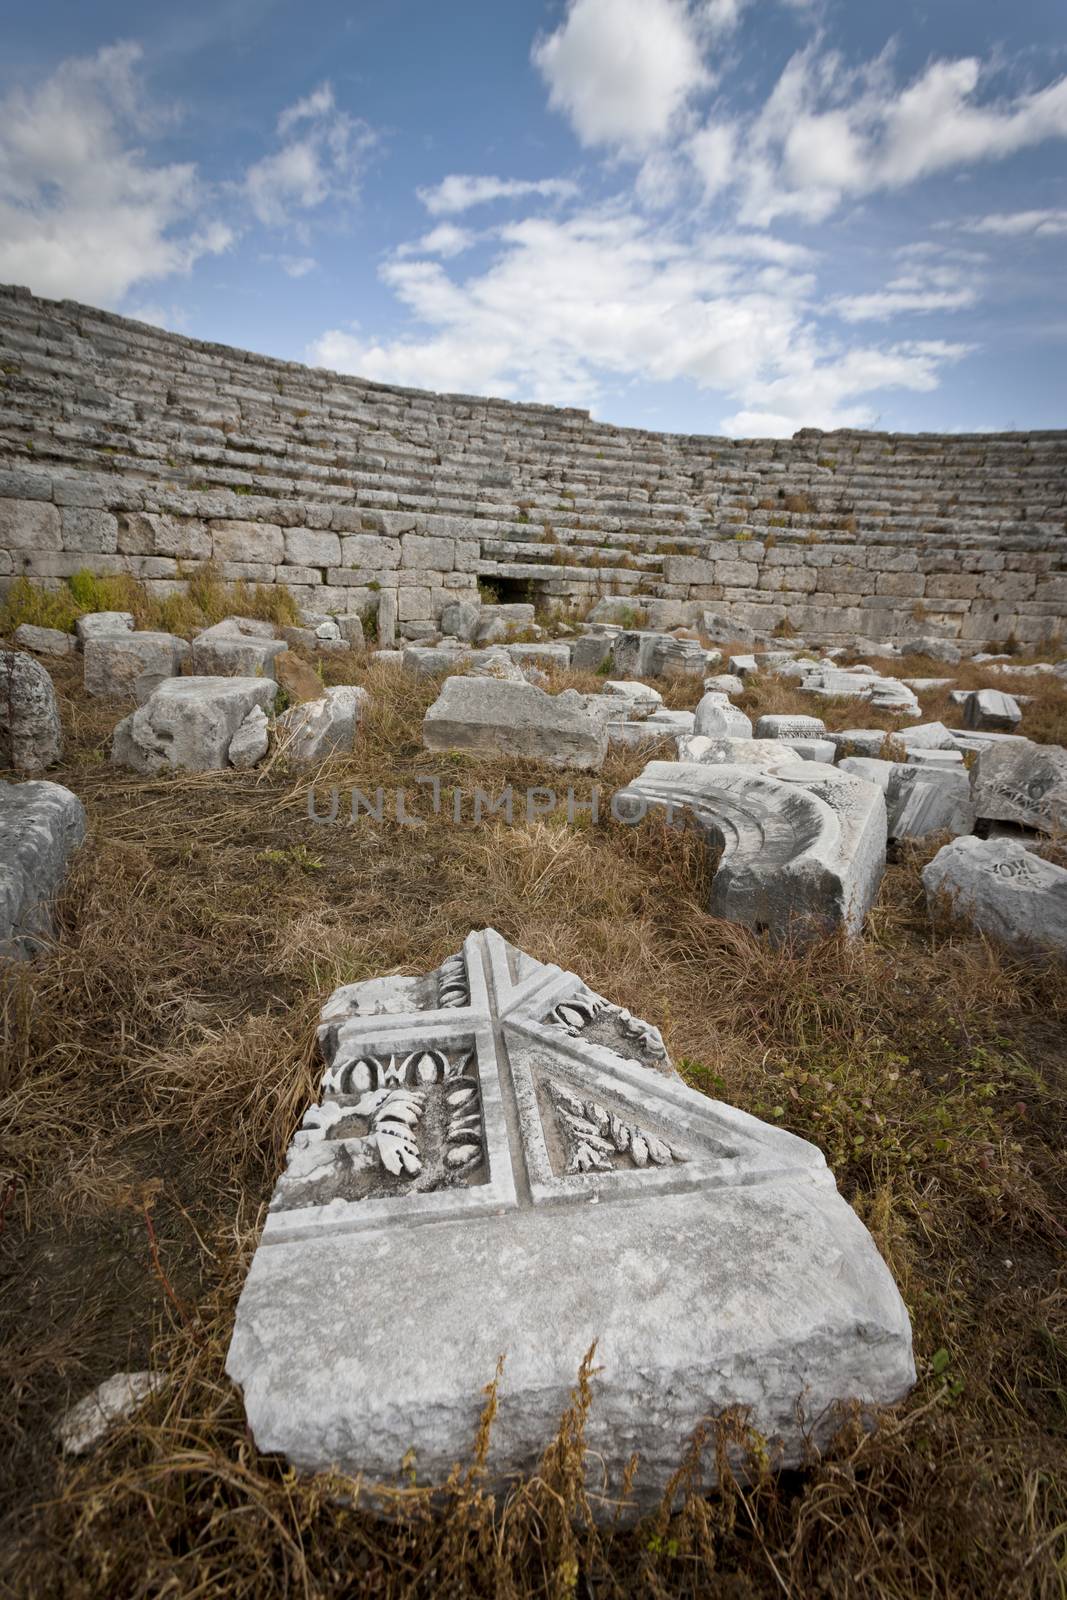 Remains of ampitheater at Perga in Turkey